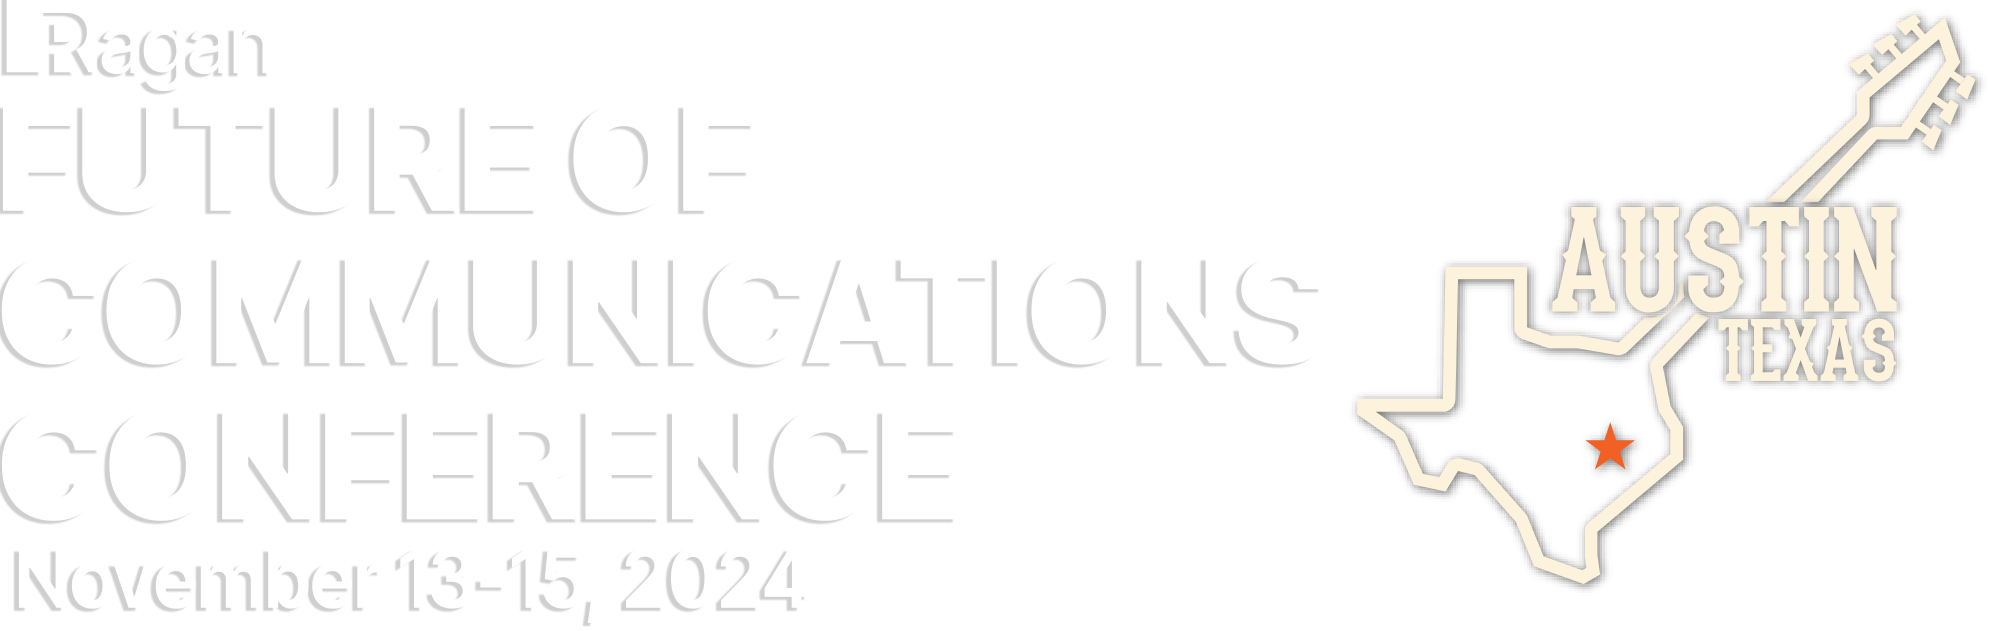 Future of Communications Conference | Nov. 13-15, 2024 | Austin, TX